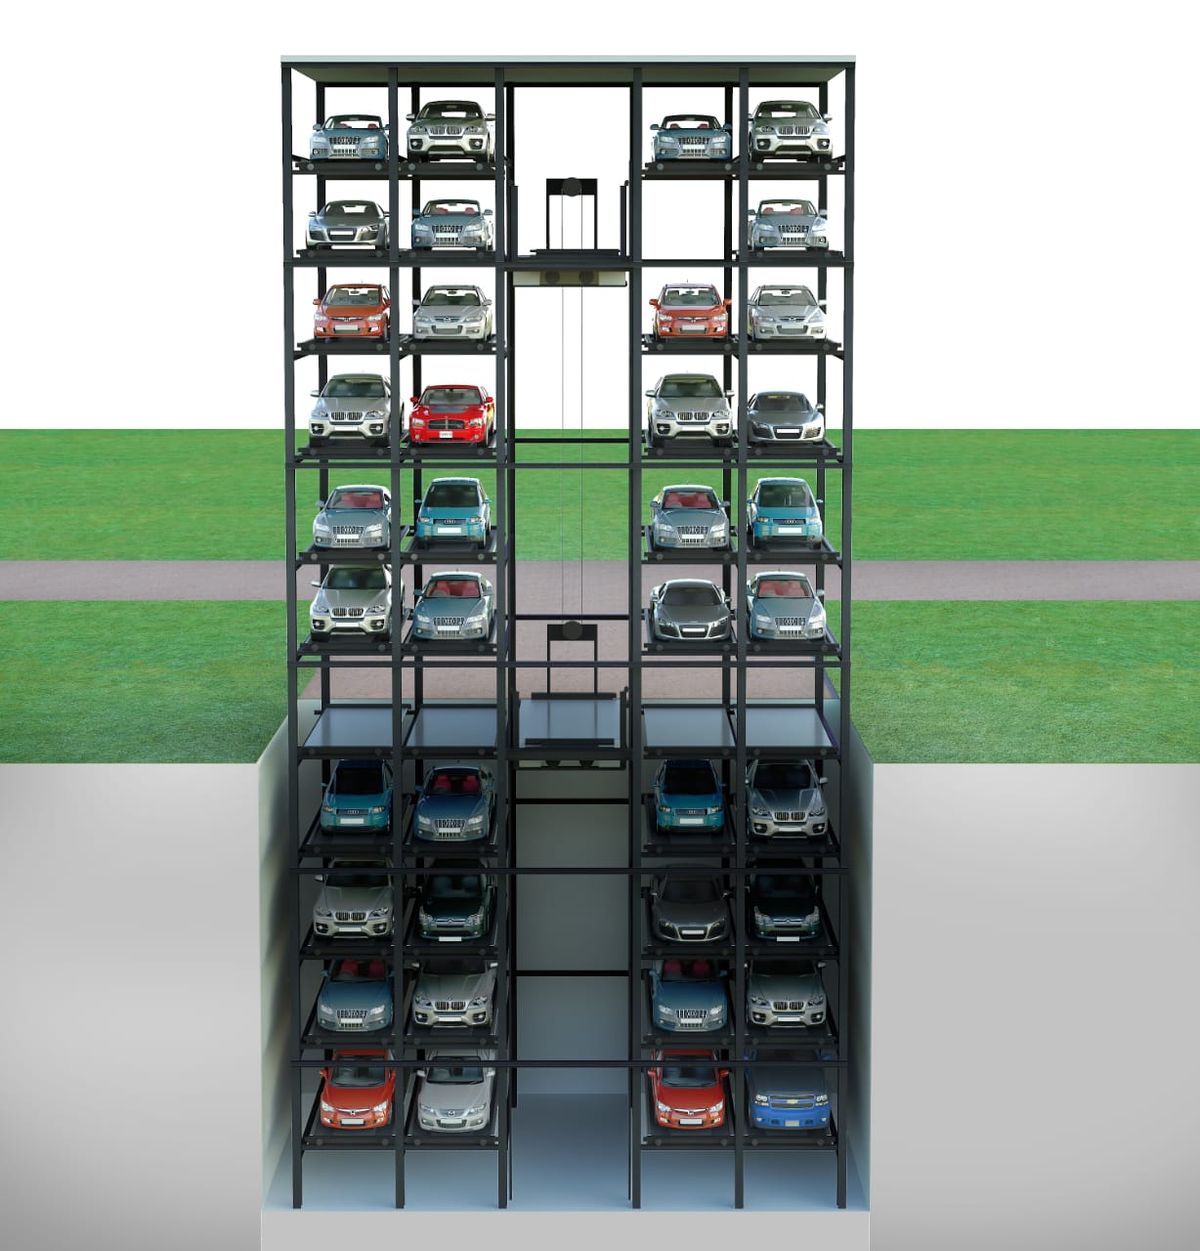 Parking system reforms 